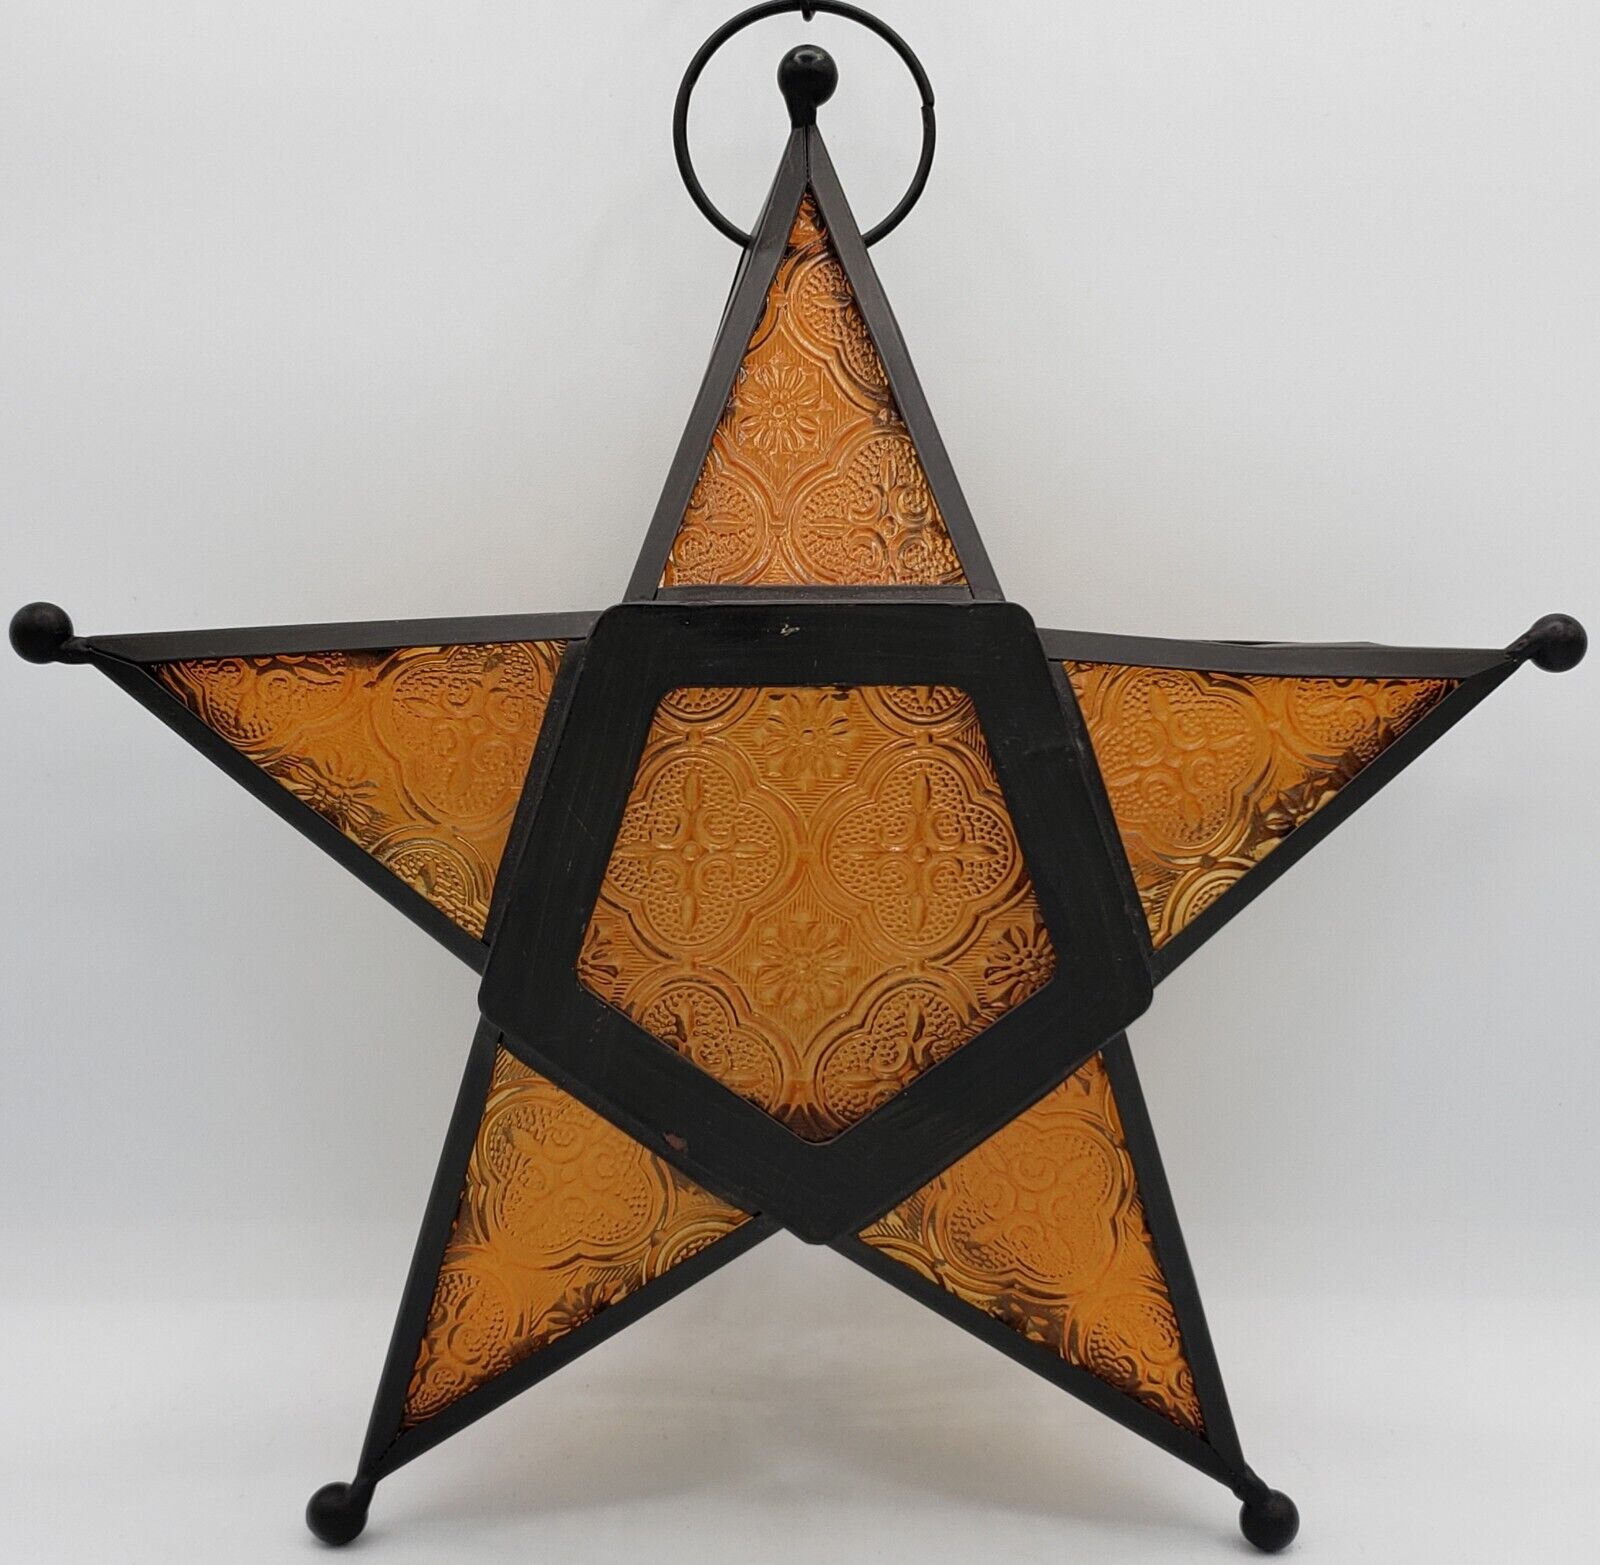 Vintage Moravian Star Amber Stained Glass Tealight Hanging Illuminated Christian